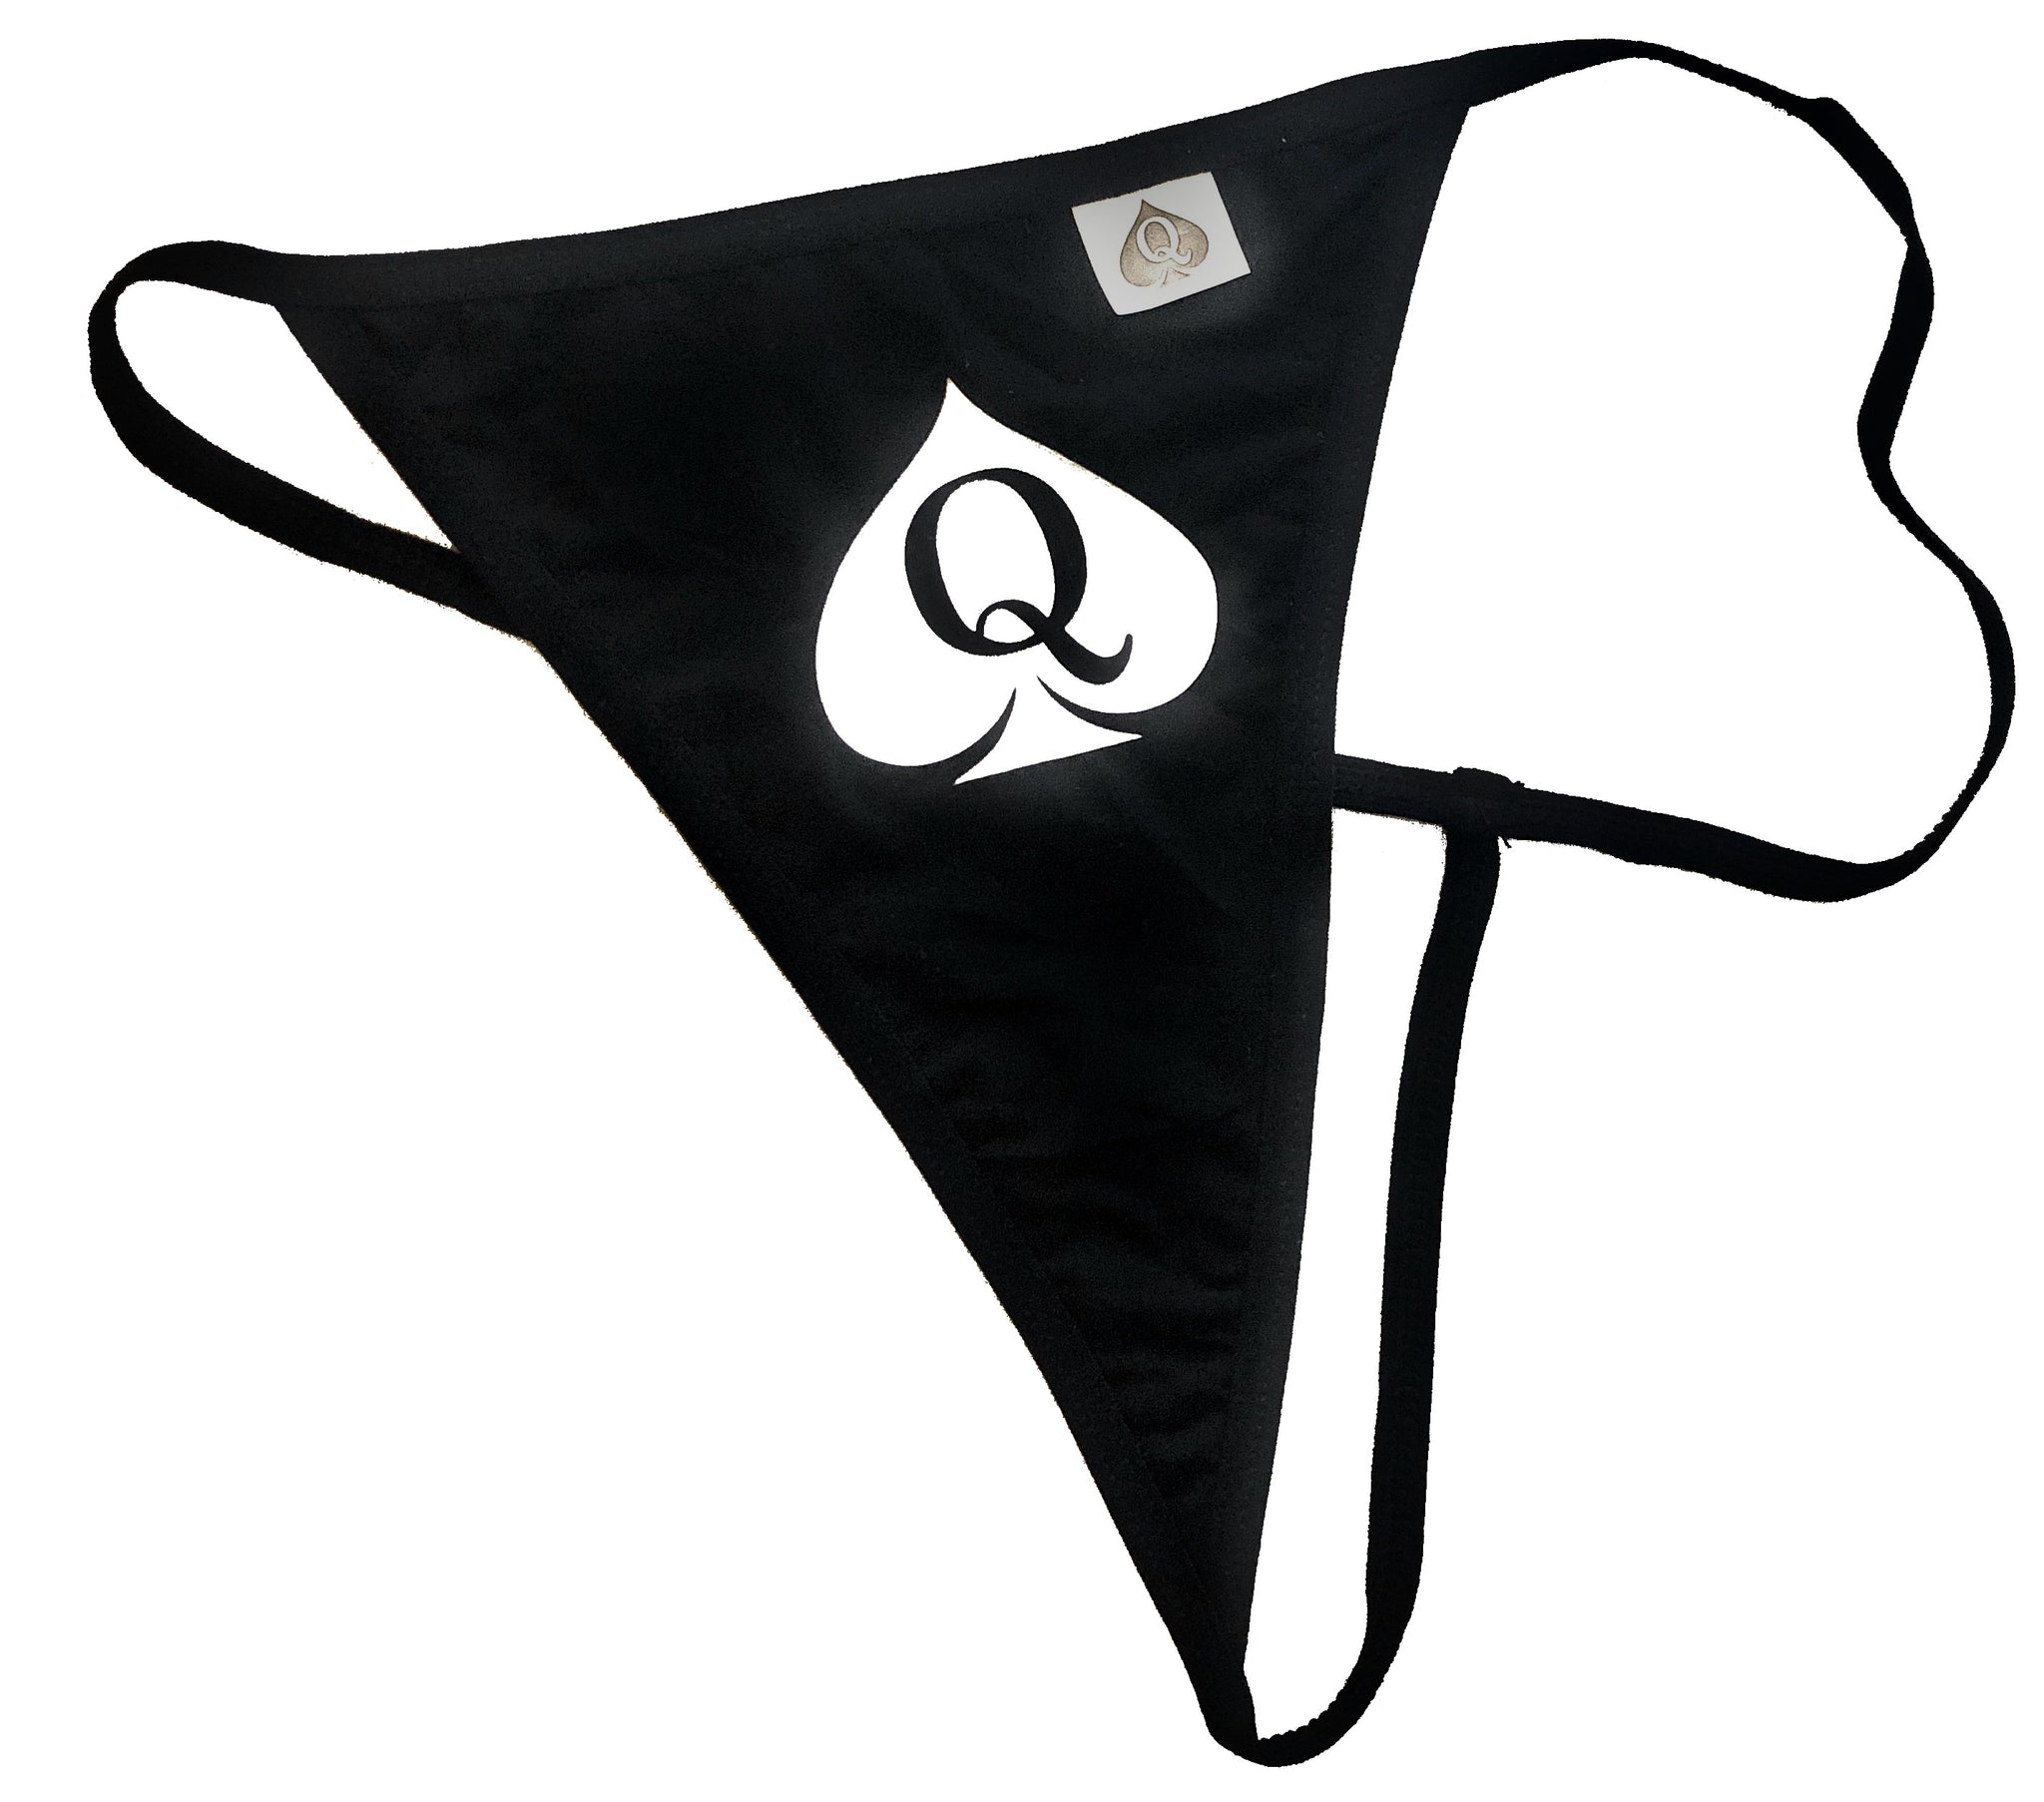 Blacked And White Qos Queen Of Spades Logo Fetish Brazilian G String